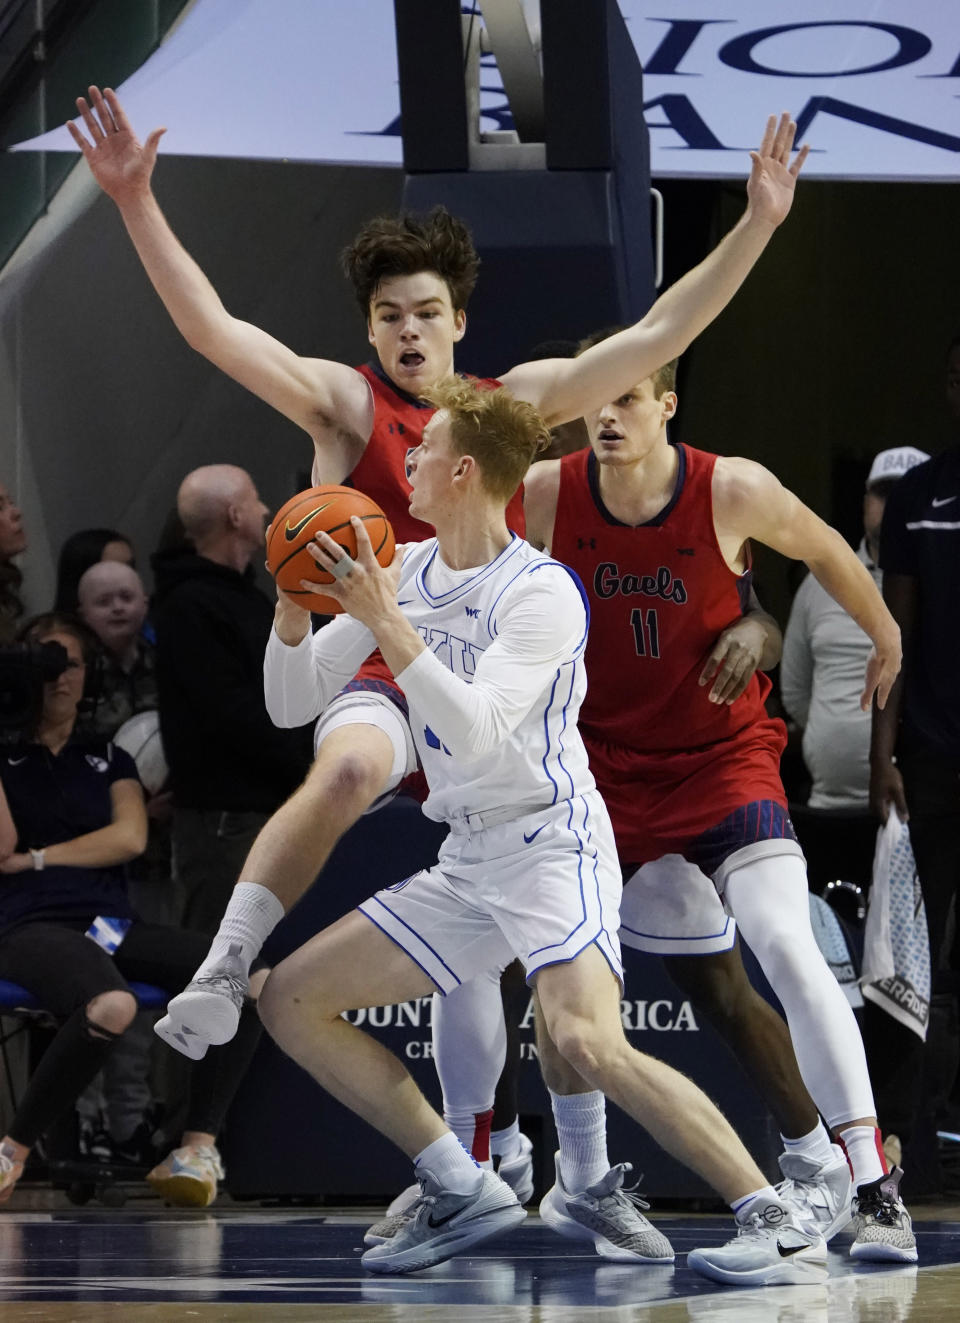 Saint Mary's guard Alex Ducas defends against BYU guard Richie Saunders, front, as Saint Mary's center Mitchell Saxen (11) blocks out during the first half of an NCAA college basketball game Saturday, Jan. 28, 2023, in Provo, Utah. (AP Photo/George Frey)